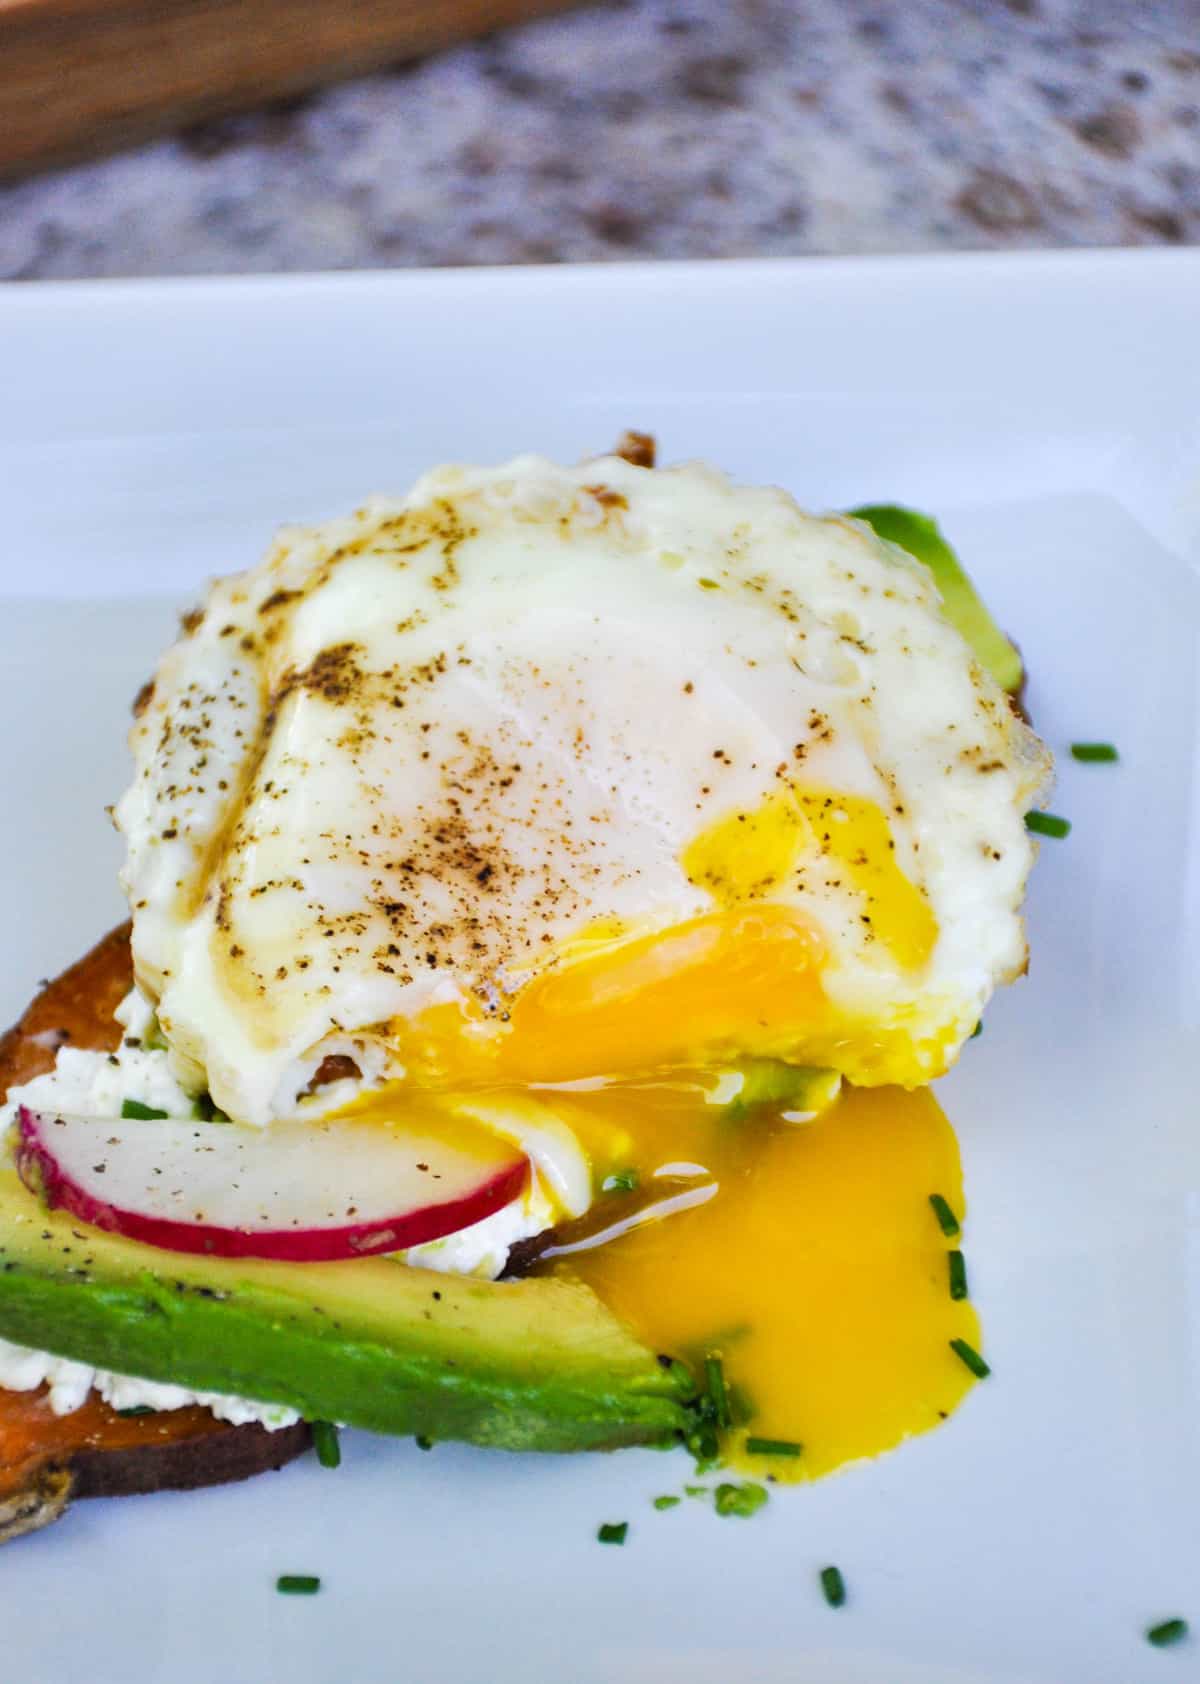 Topped with egg